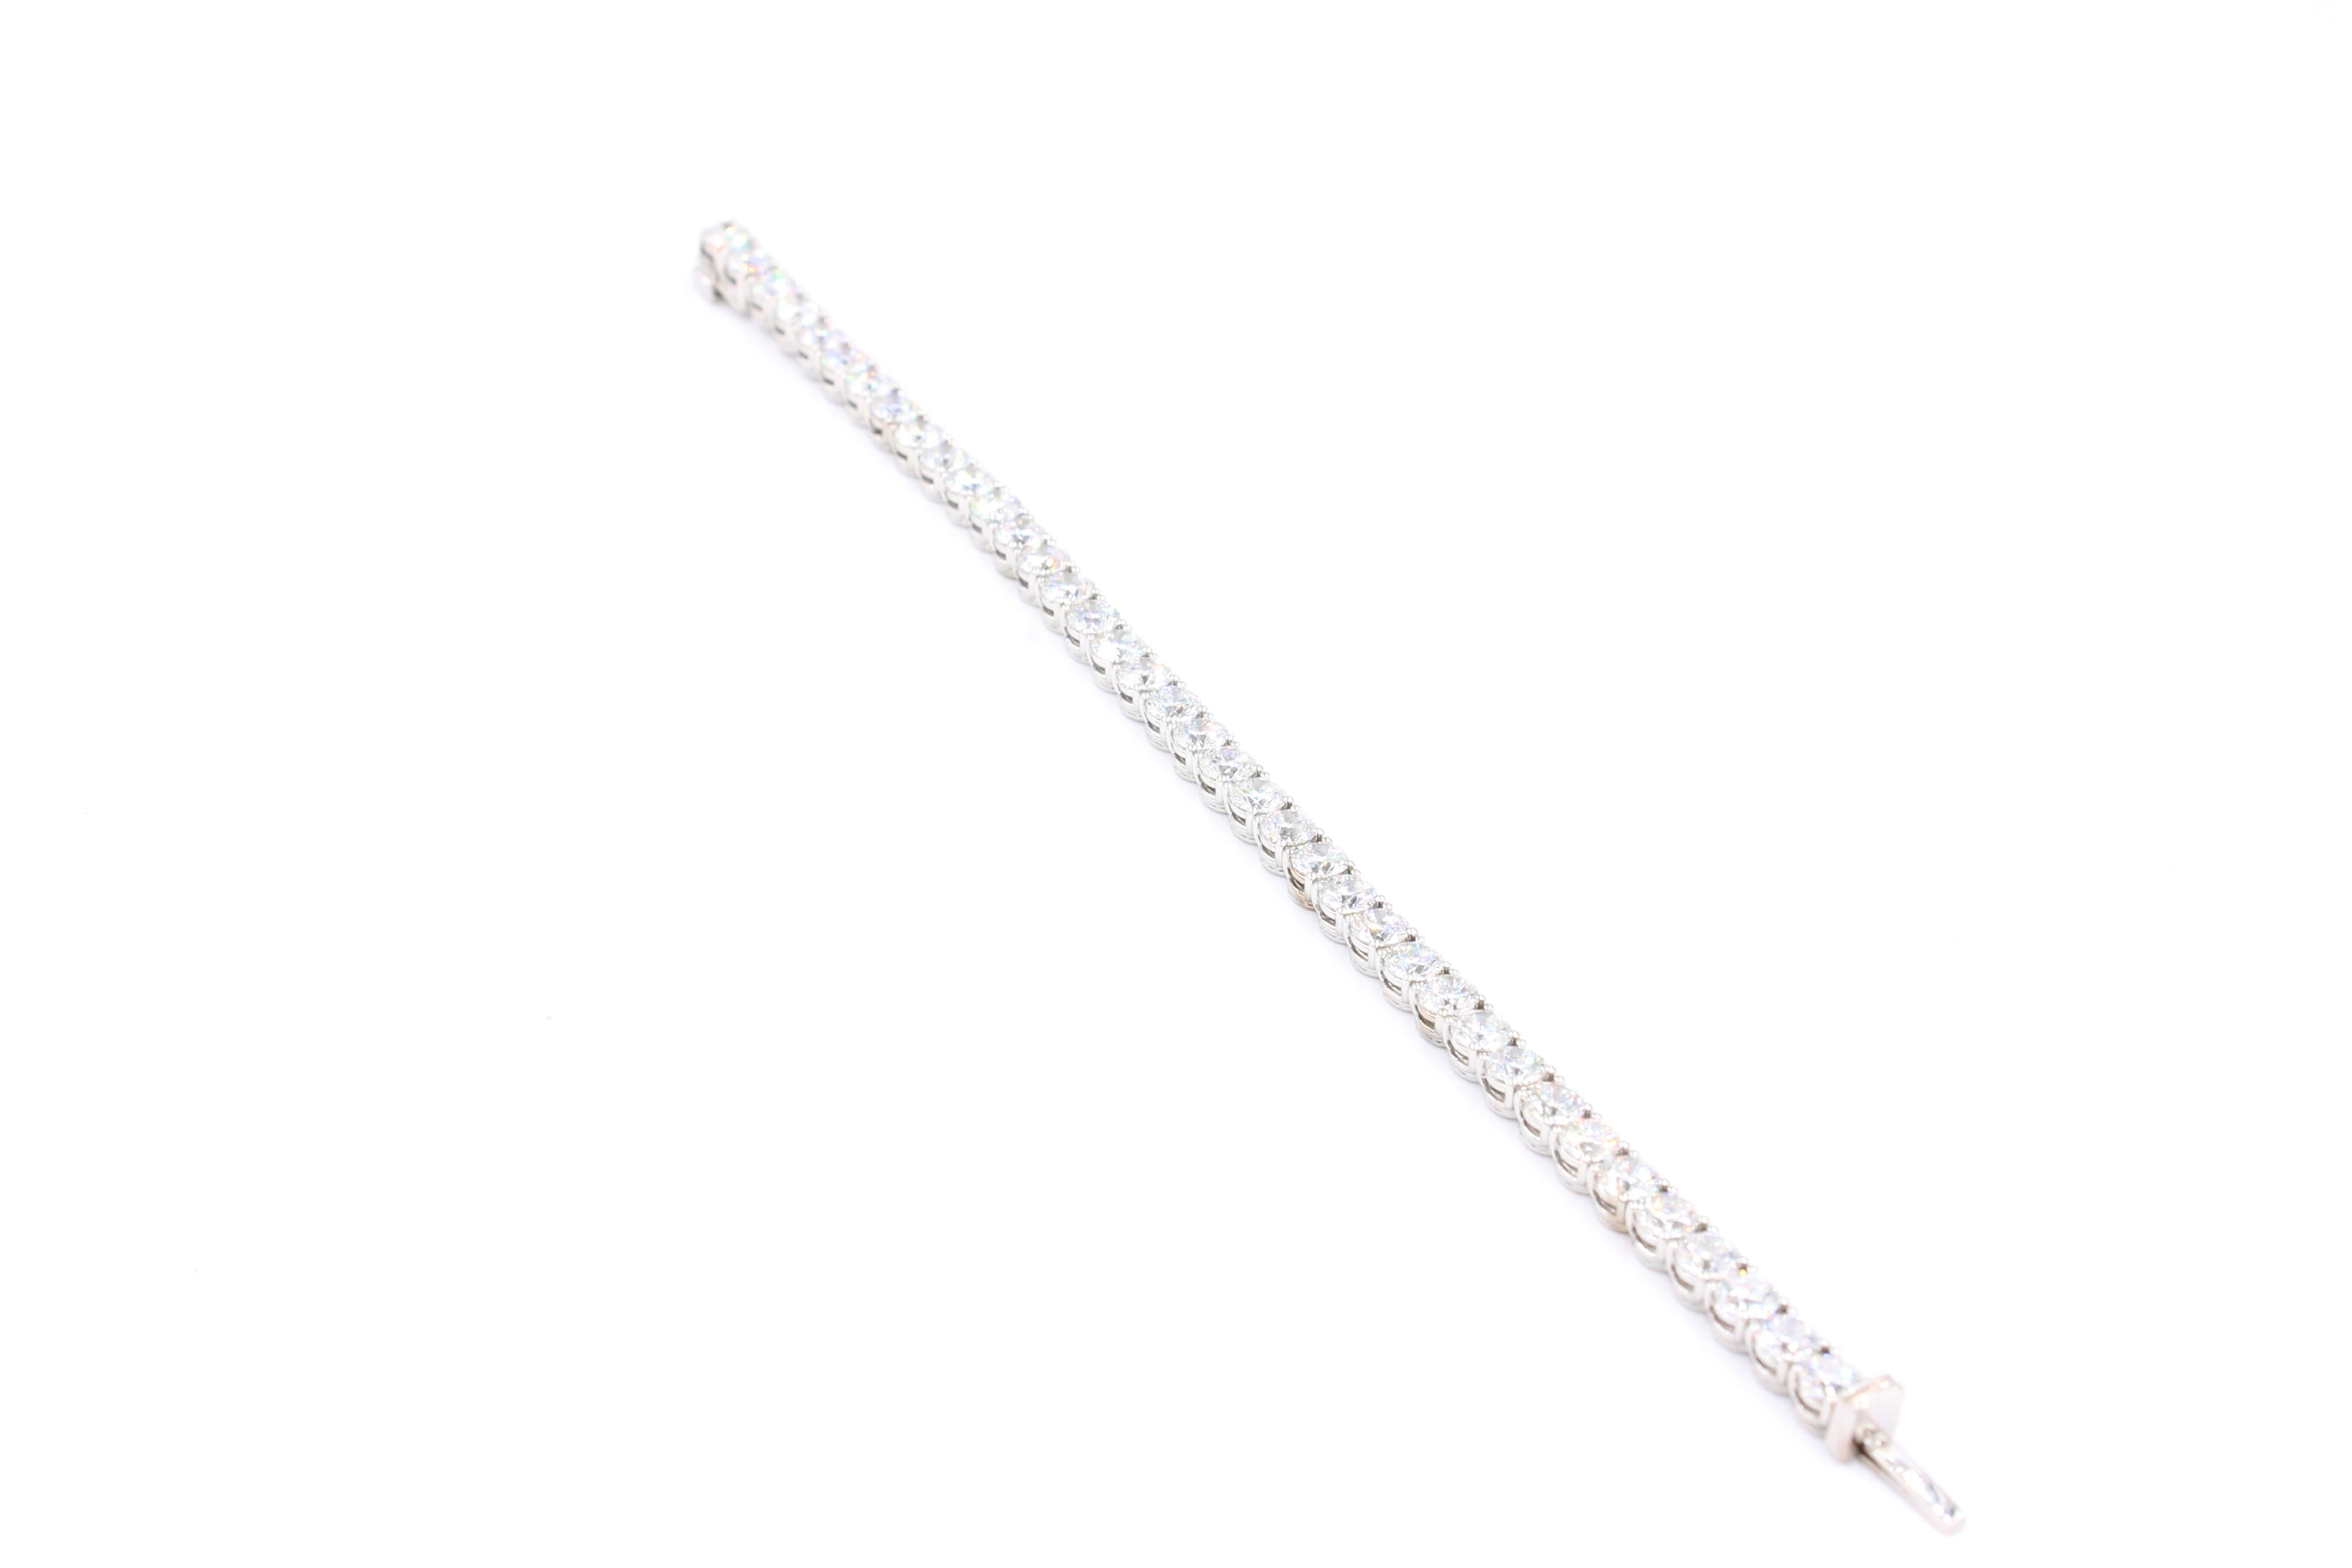 Classic Diamond tennis bracelet made of gold 18k weighting 16.80 grams. 

The bracelet is set with 38 diamonds for a total of 11.44 Carats. All diamonds are GIA Certified and weight on average 0.30 Carats. The diamonds are white with a color of D, E